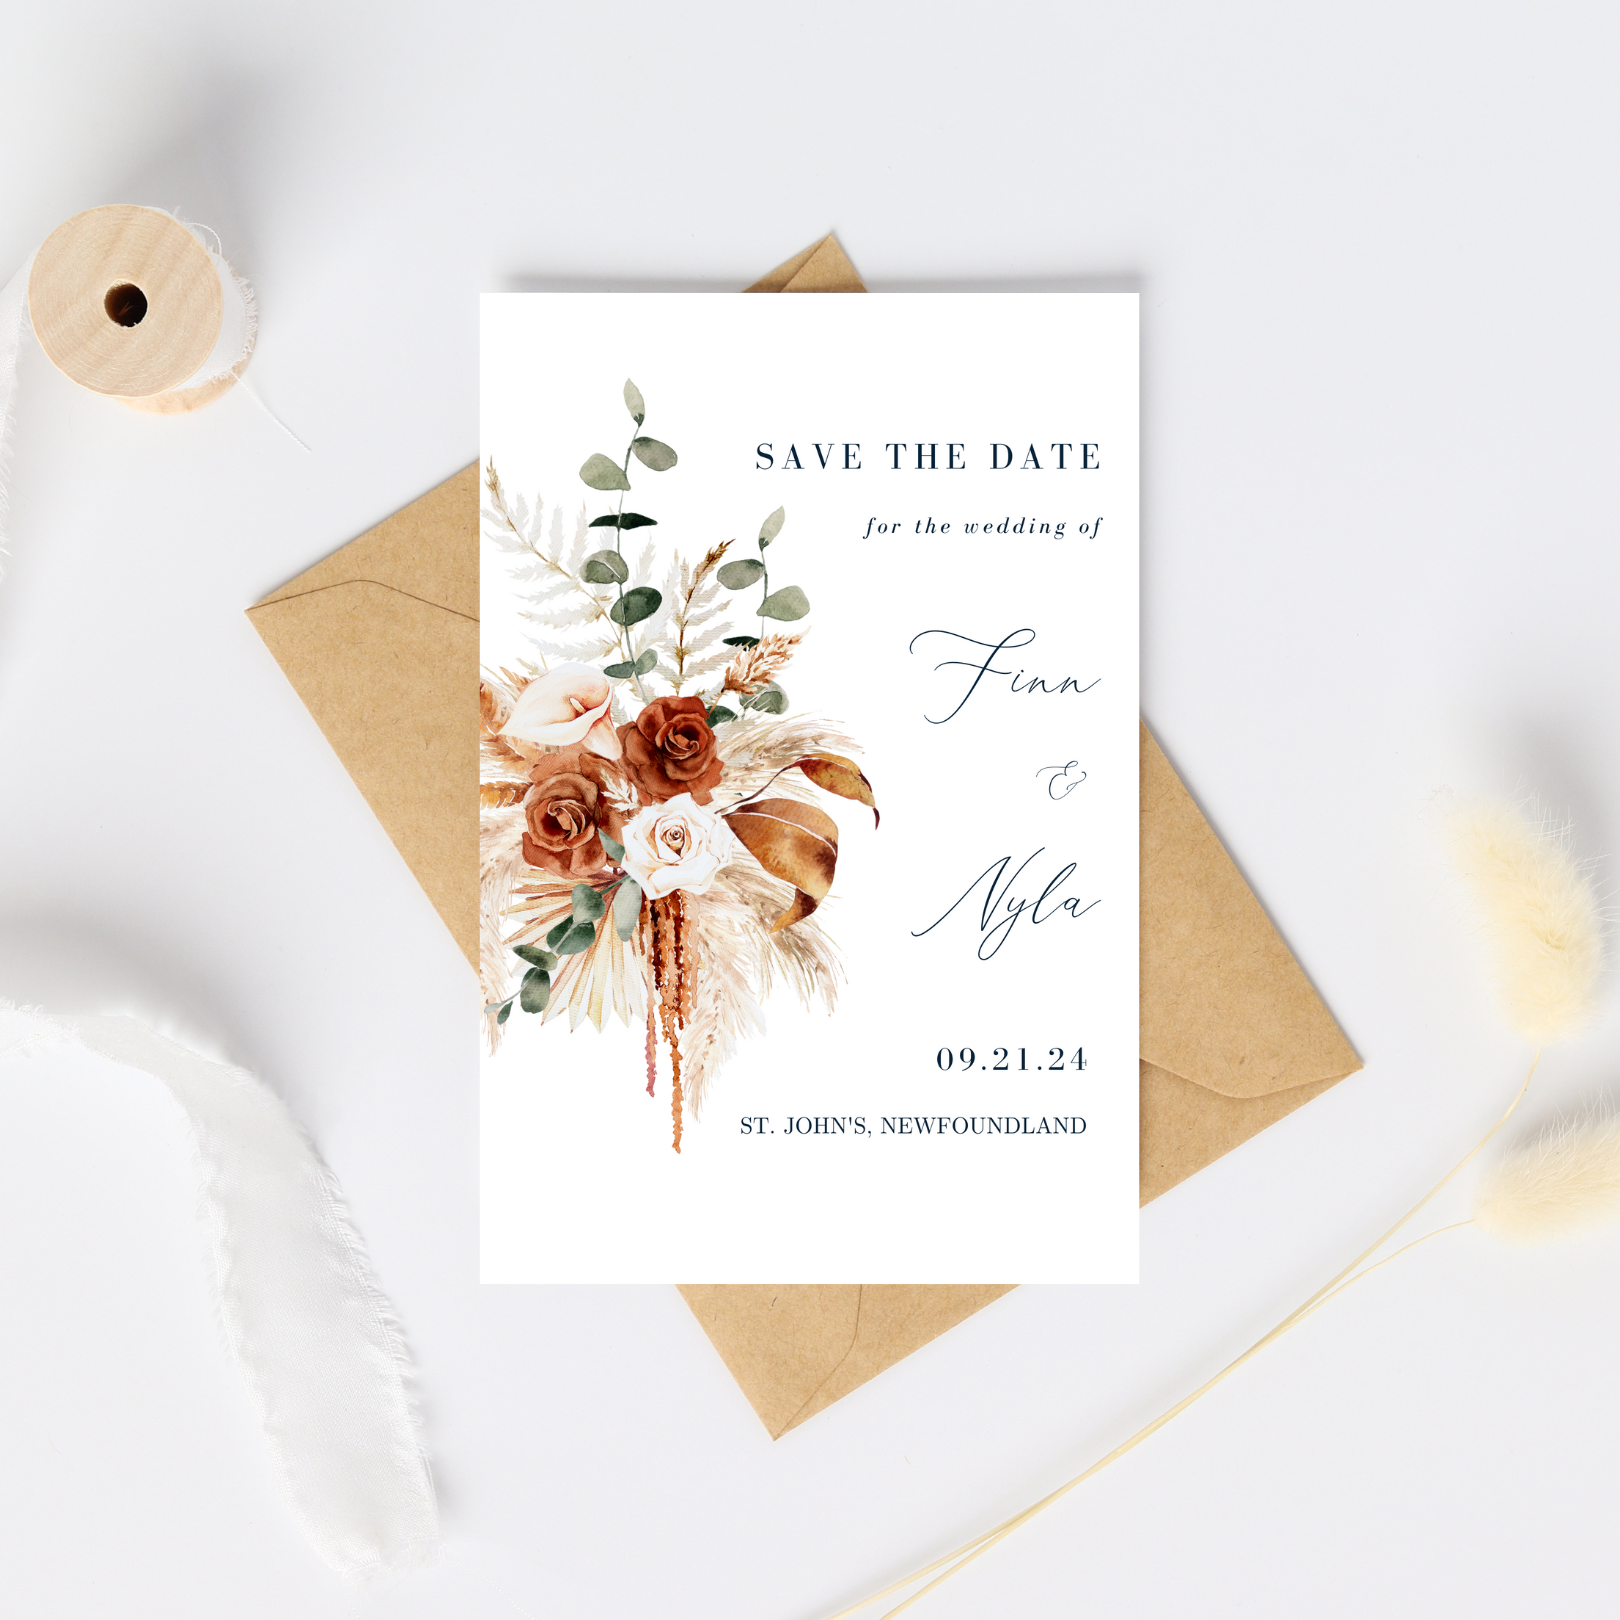 A white card with an image of a bohemian style floral bouquet sits on top of a kraft paper envelope. A spool of partially unwound white ribbon frames the card. On the Save The Date, the guest information is positioned on the right hand side.